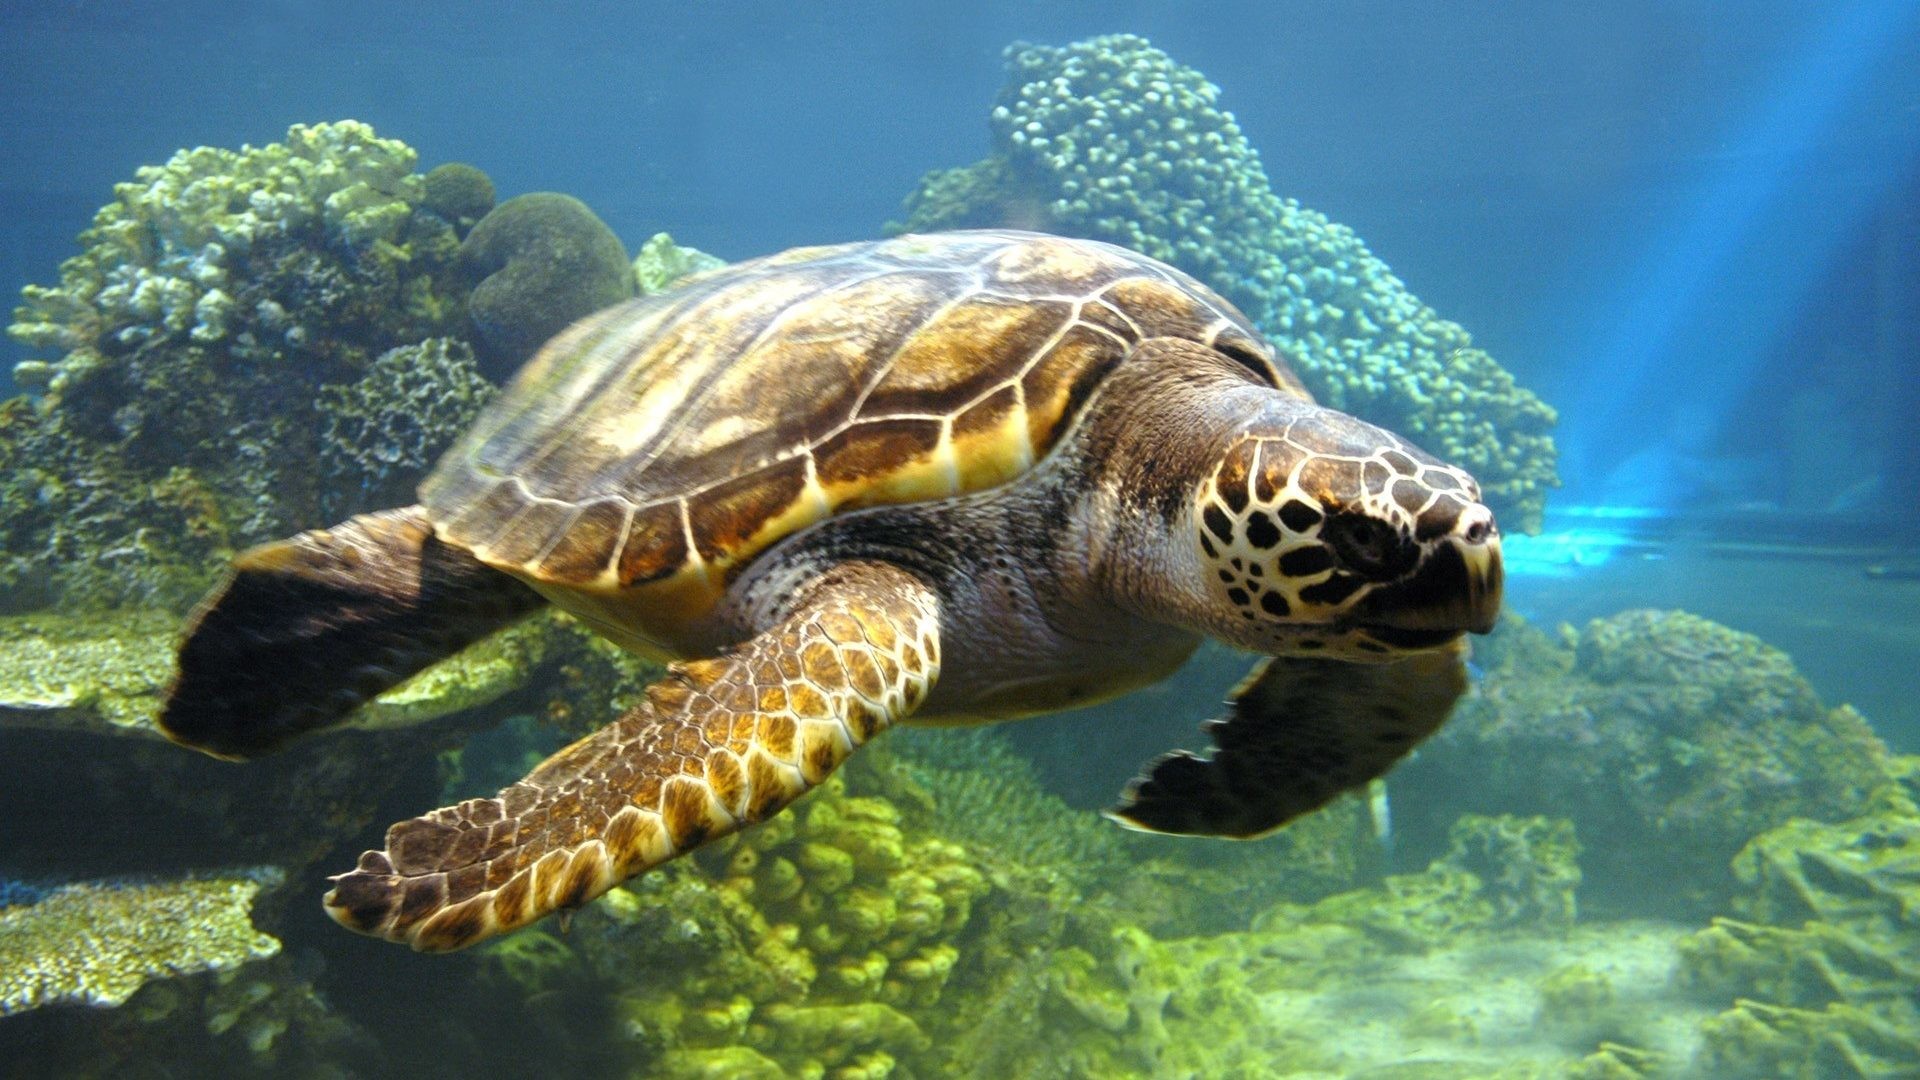 1920x1080 Sea Tag - Animals Coral Sea Water Turtles Reef Nature Animal Wallpapers For  Computer for HD